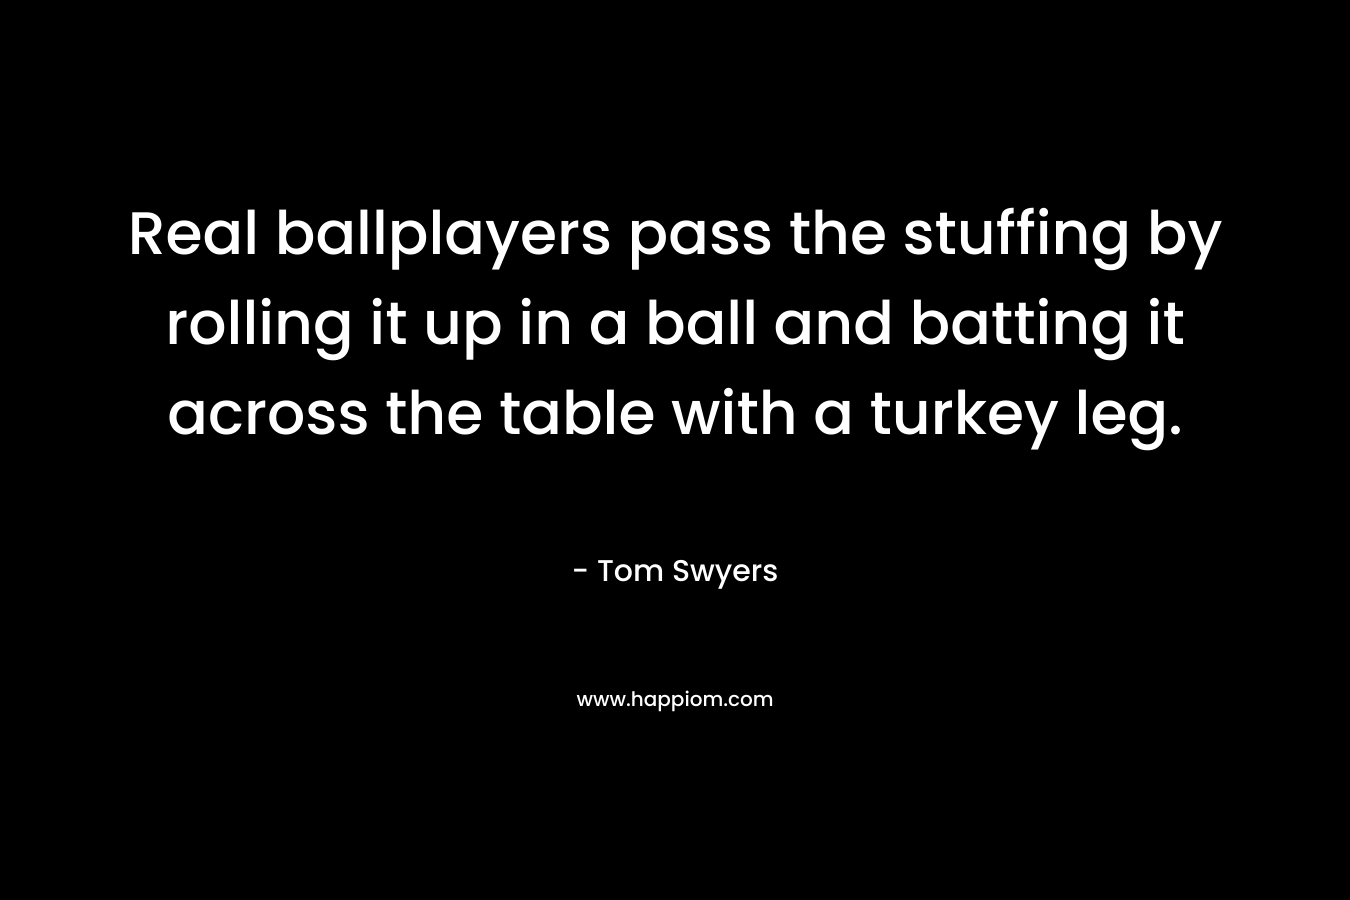 Real ballplayers pass the stuffing by rolling it up in a ball and batting it across the table with a turkey leg. – Tom Swyers